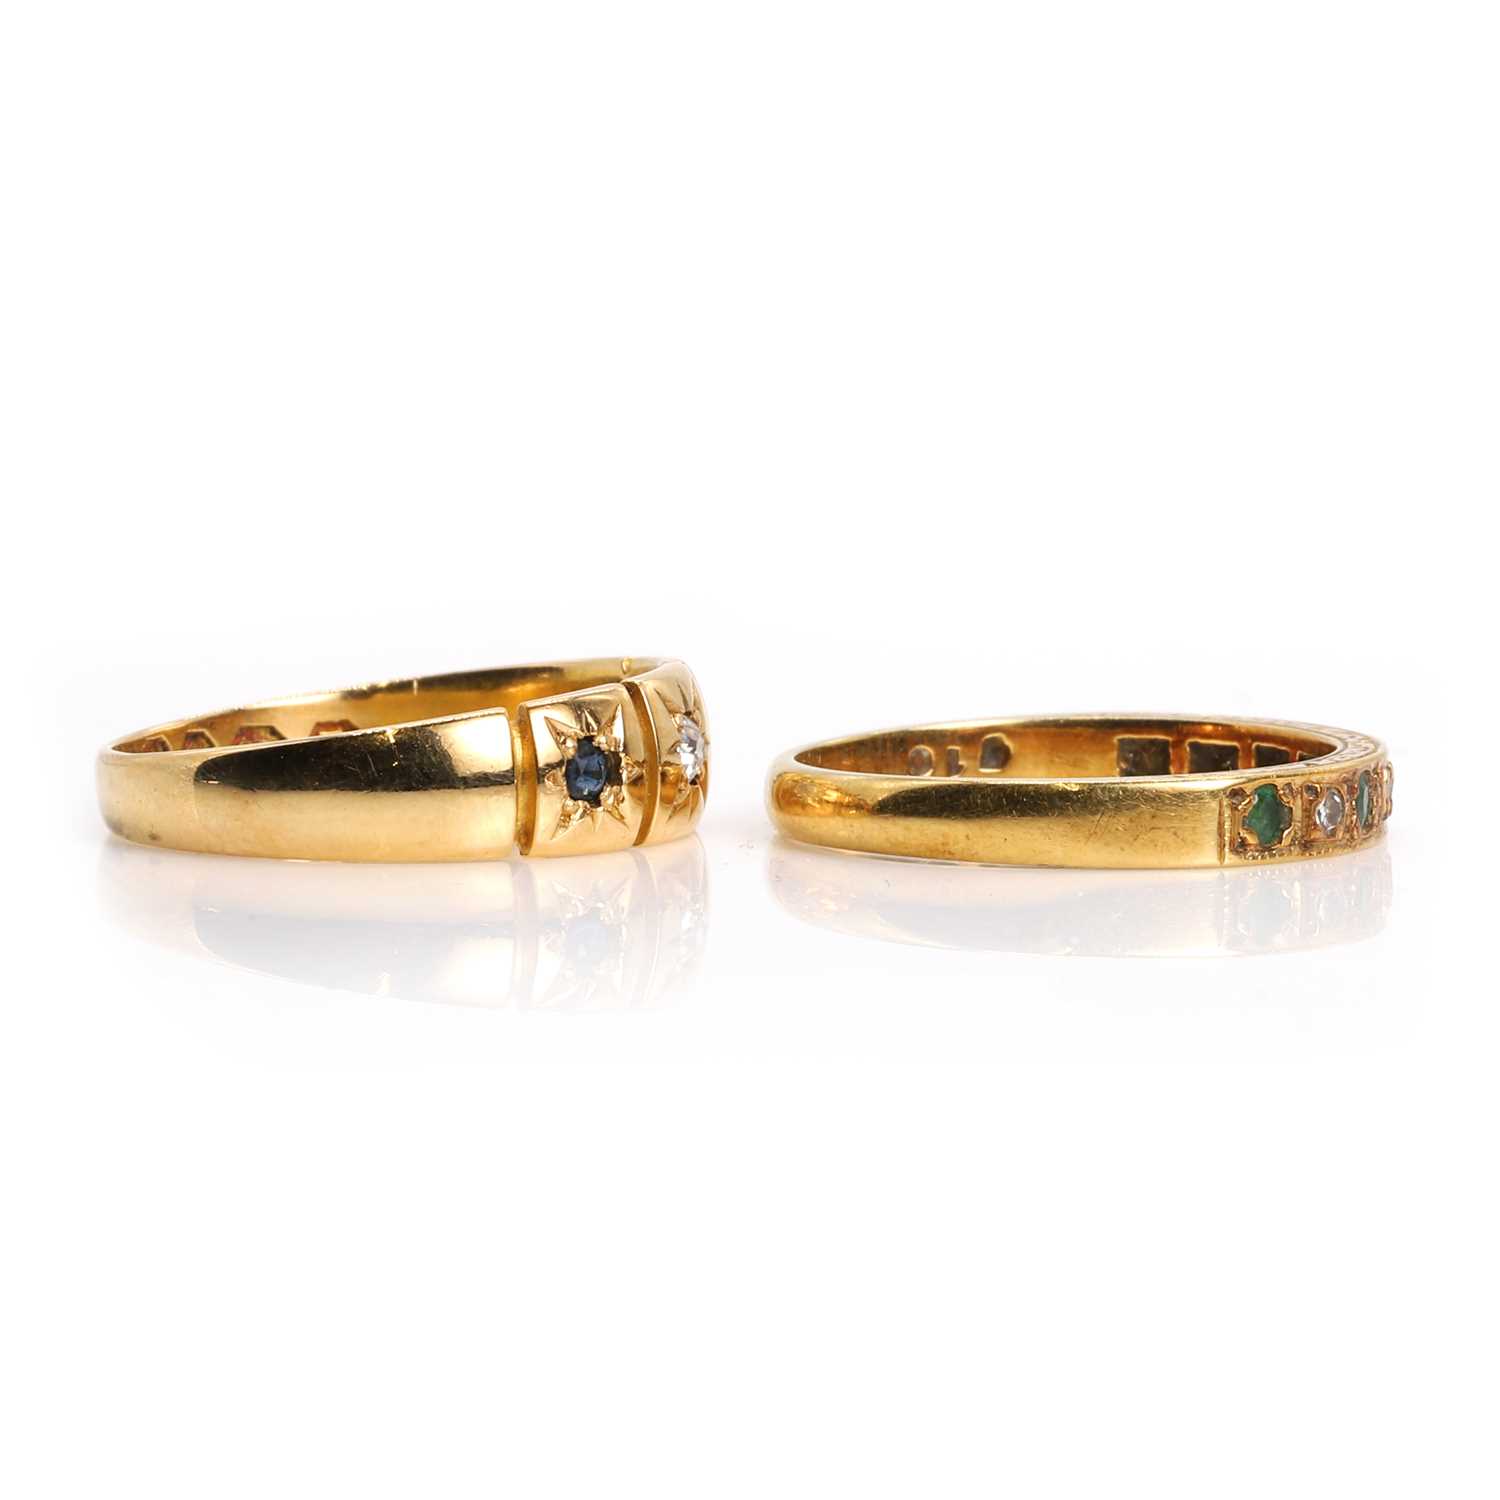 An antique 18ct gold gypsy ring and a half-eternity ring, - Image 2 of 3